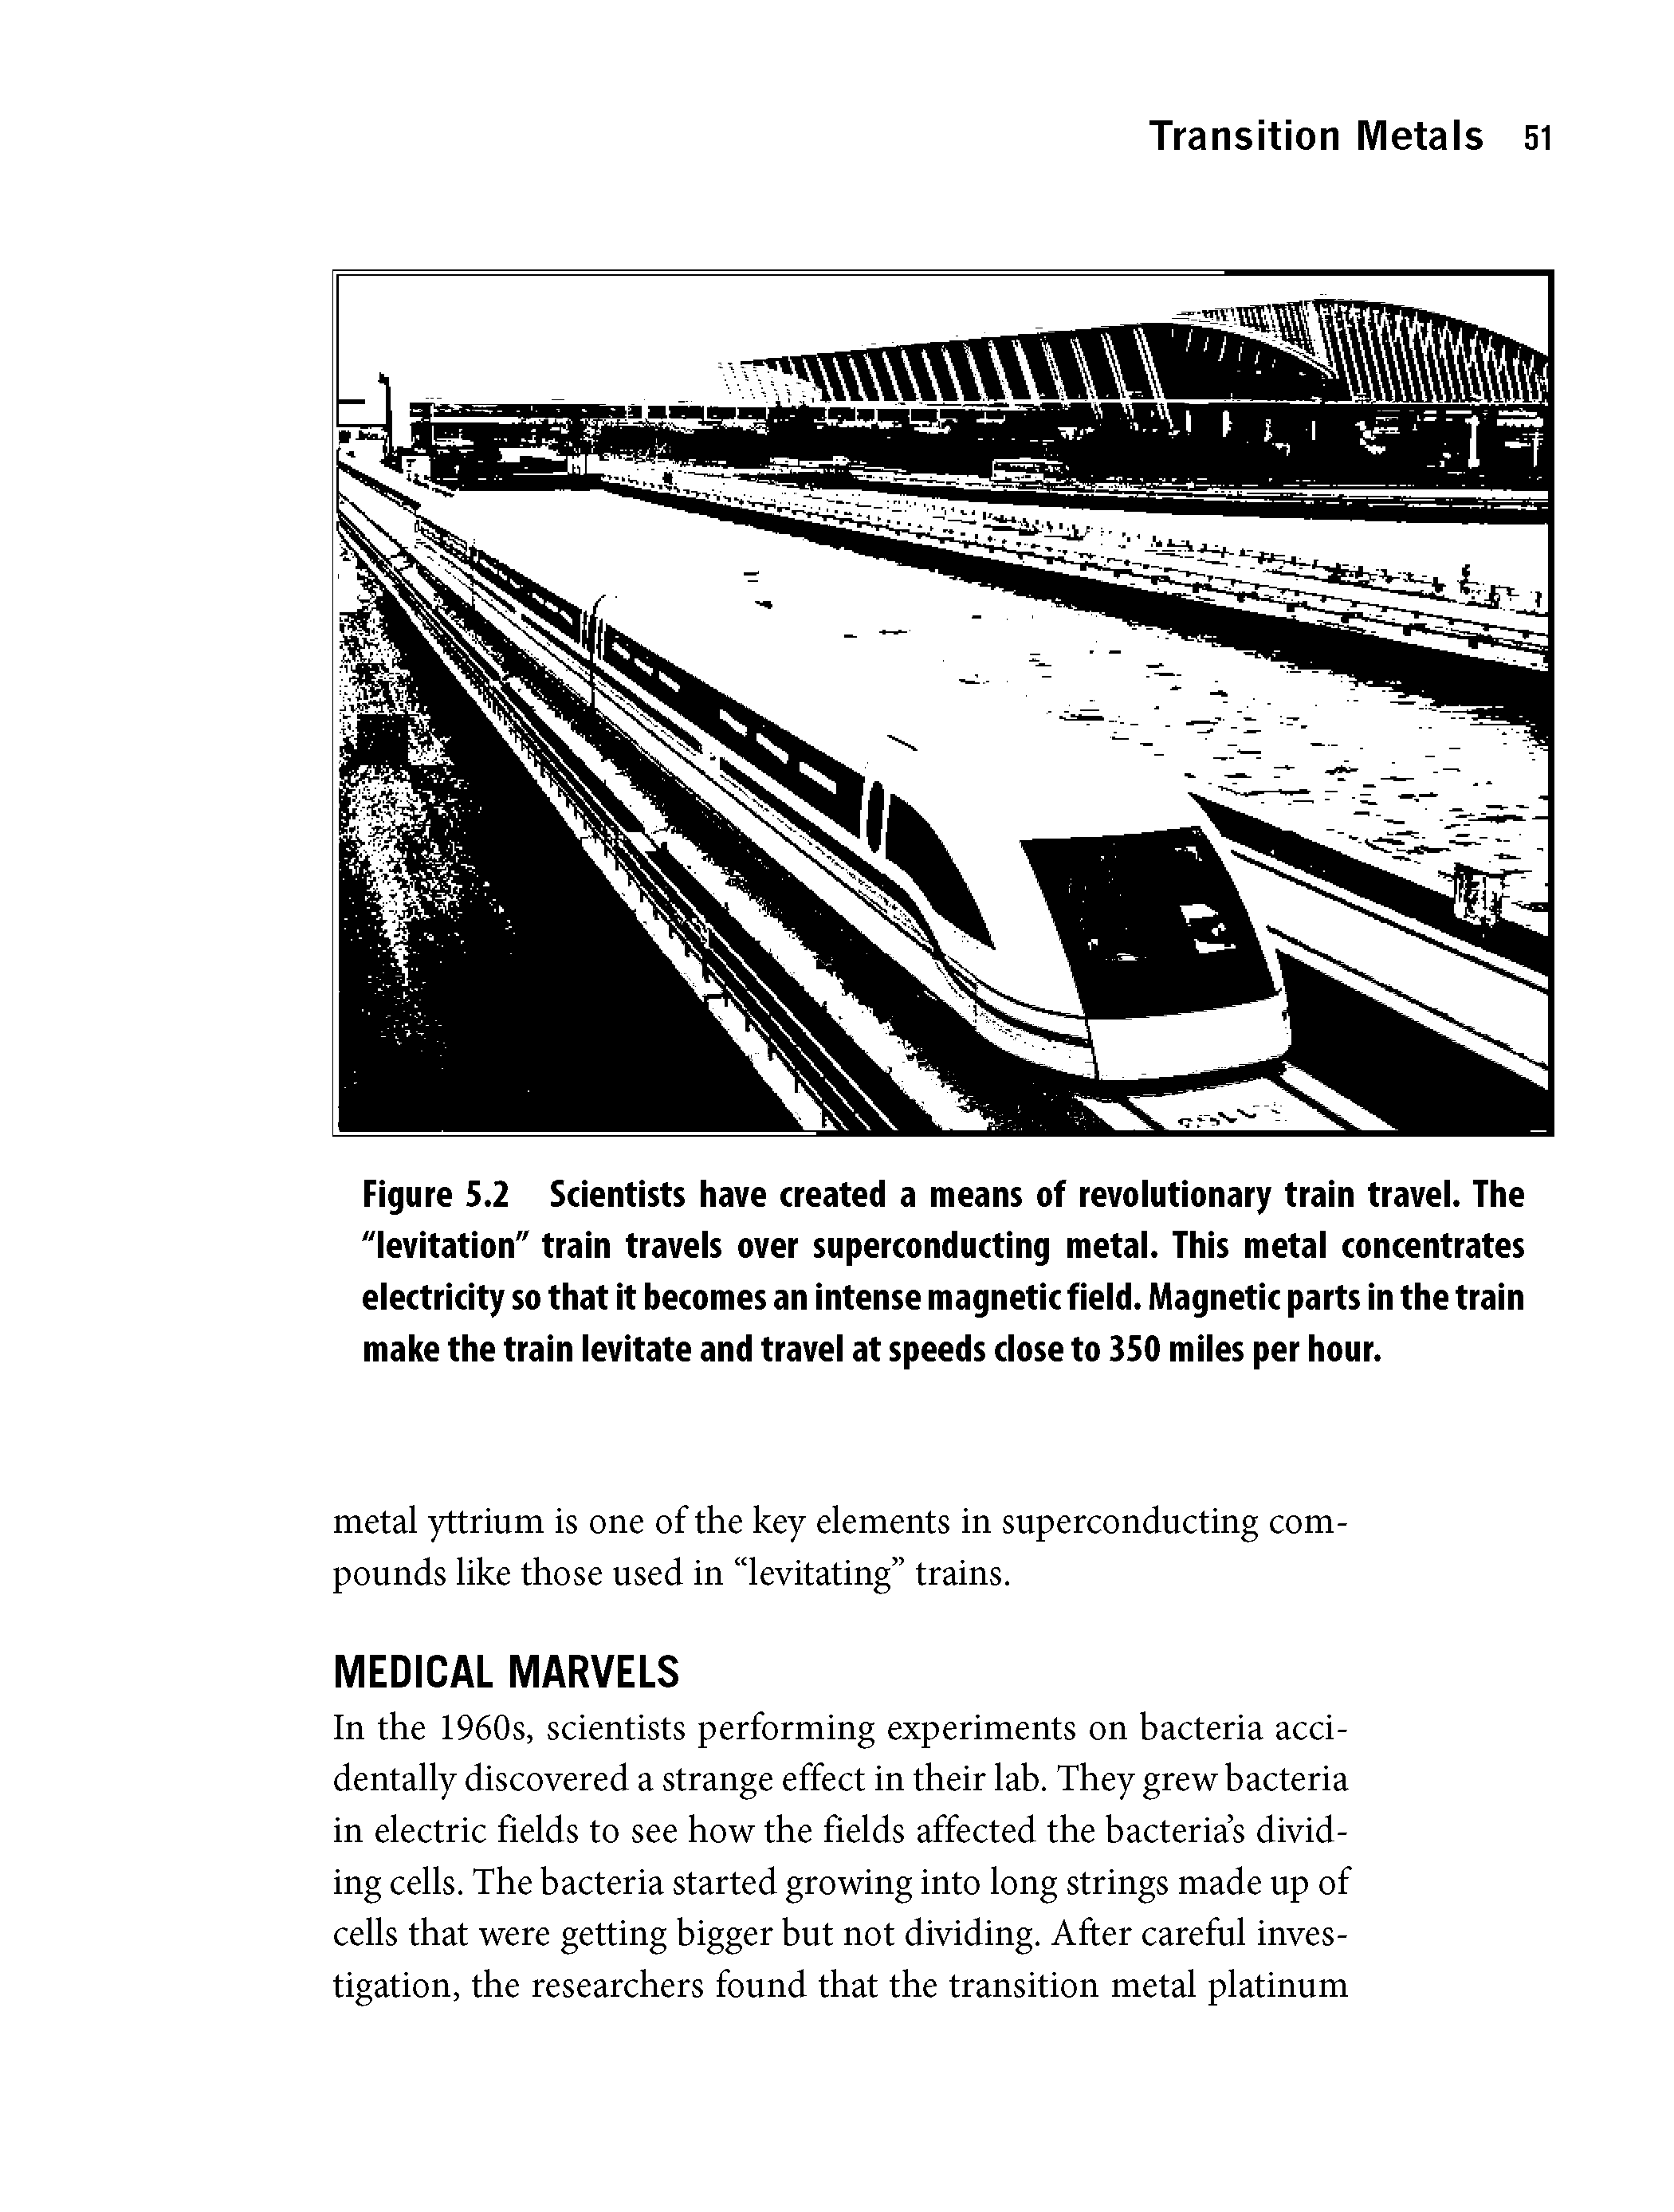 Figure 5.2 Scientists have created a means of revolutionary train travel. The "levitation" train travels over superconducting metal. This metal concentrates electricity so that it becomes an intense magnetic field. Magnetic parts in the train make the train levitate and travel at speeds close to 350 miles per hour.